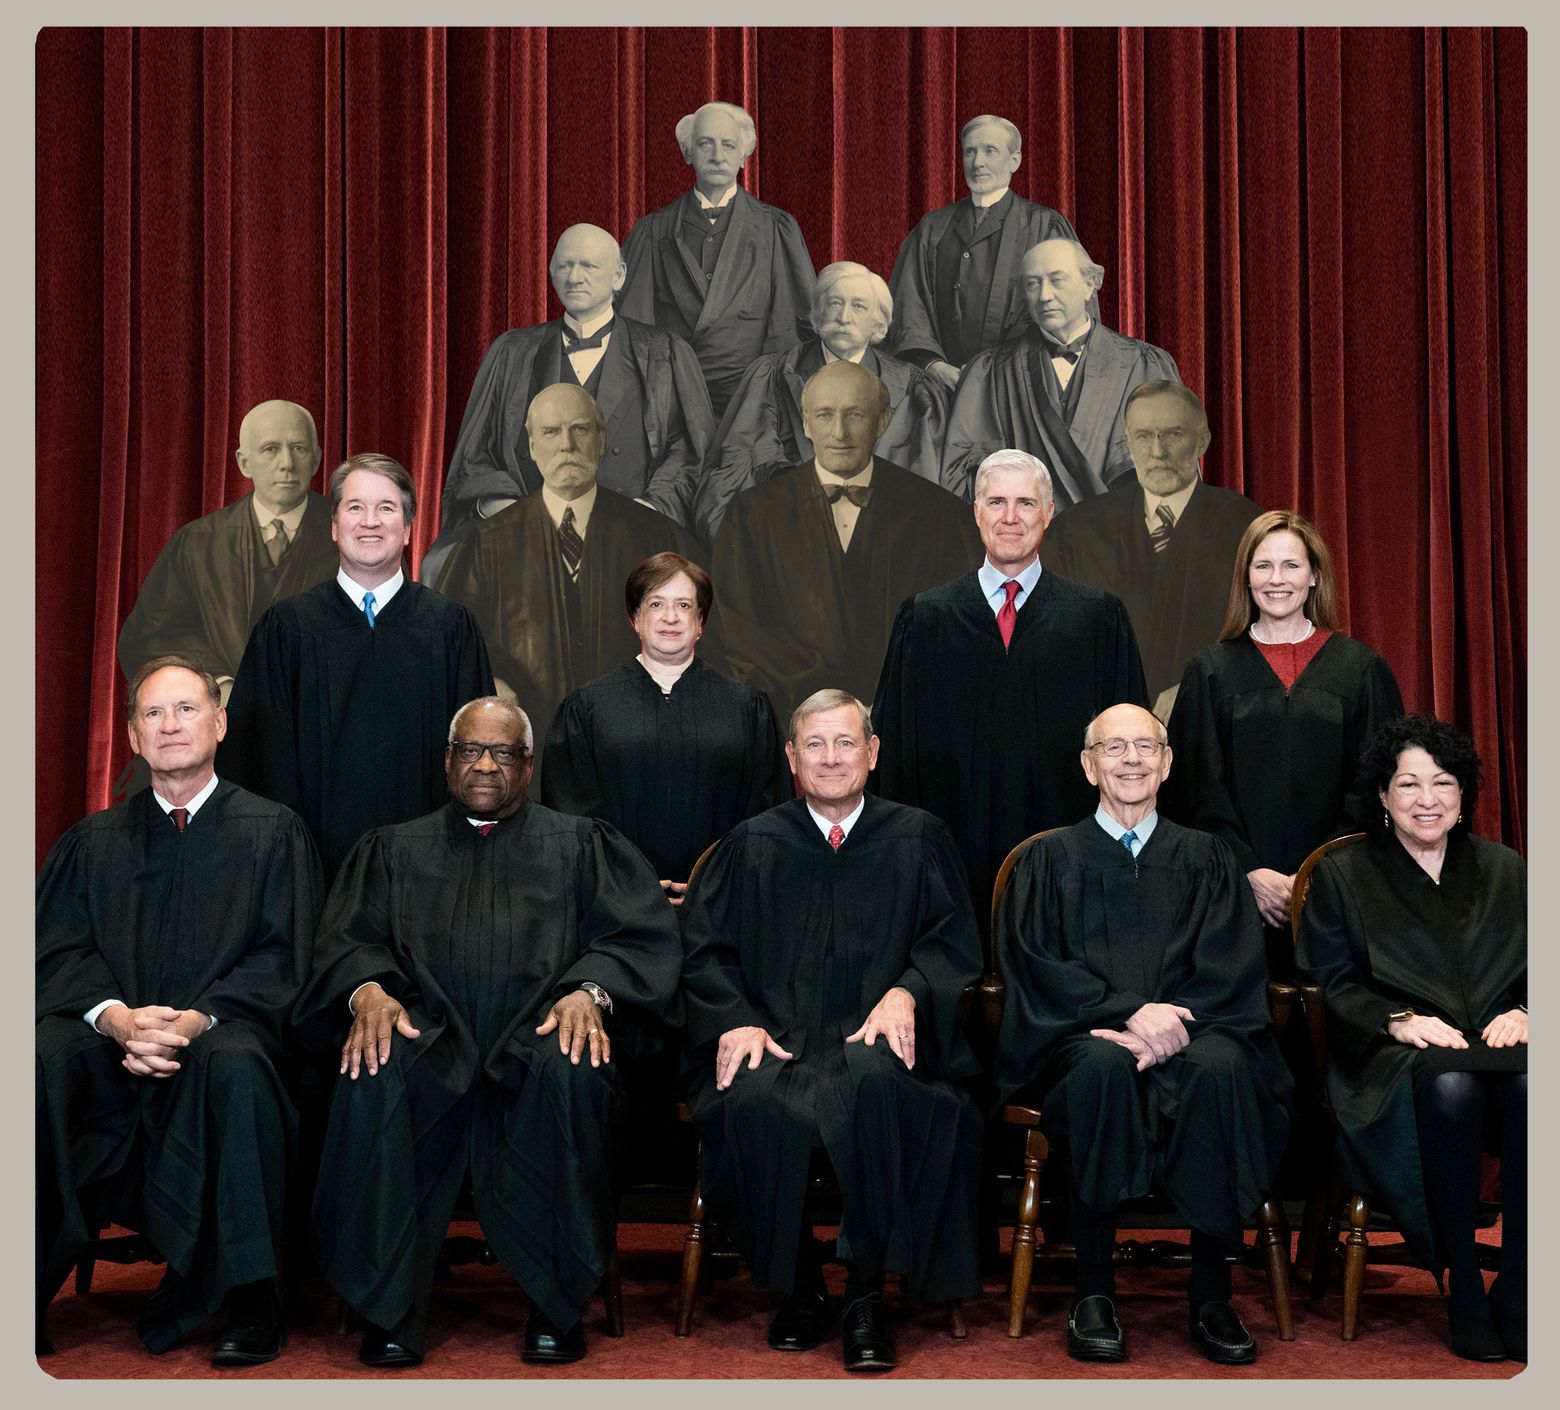 Who Is the Chief Justice of the United States Now? - Constitution of the United  States Store